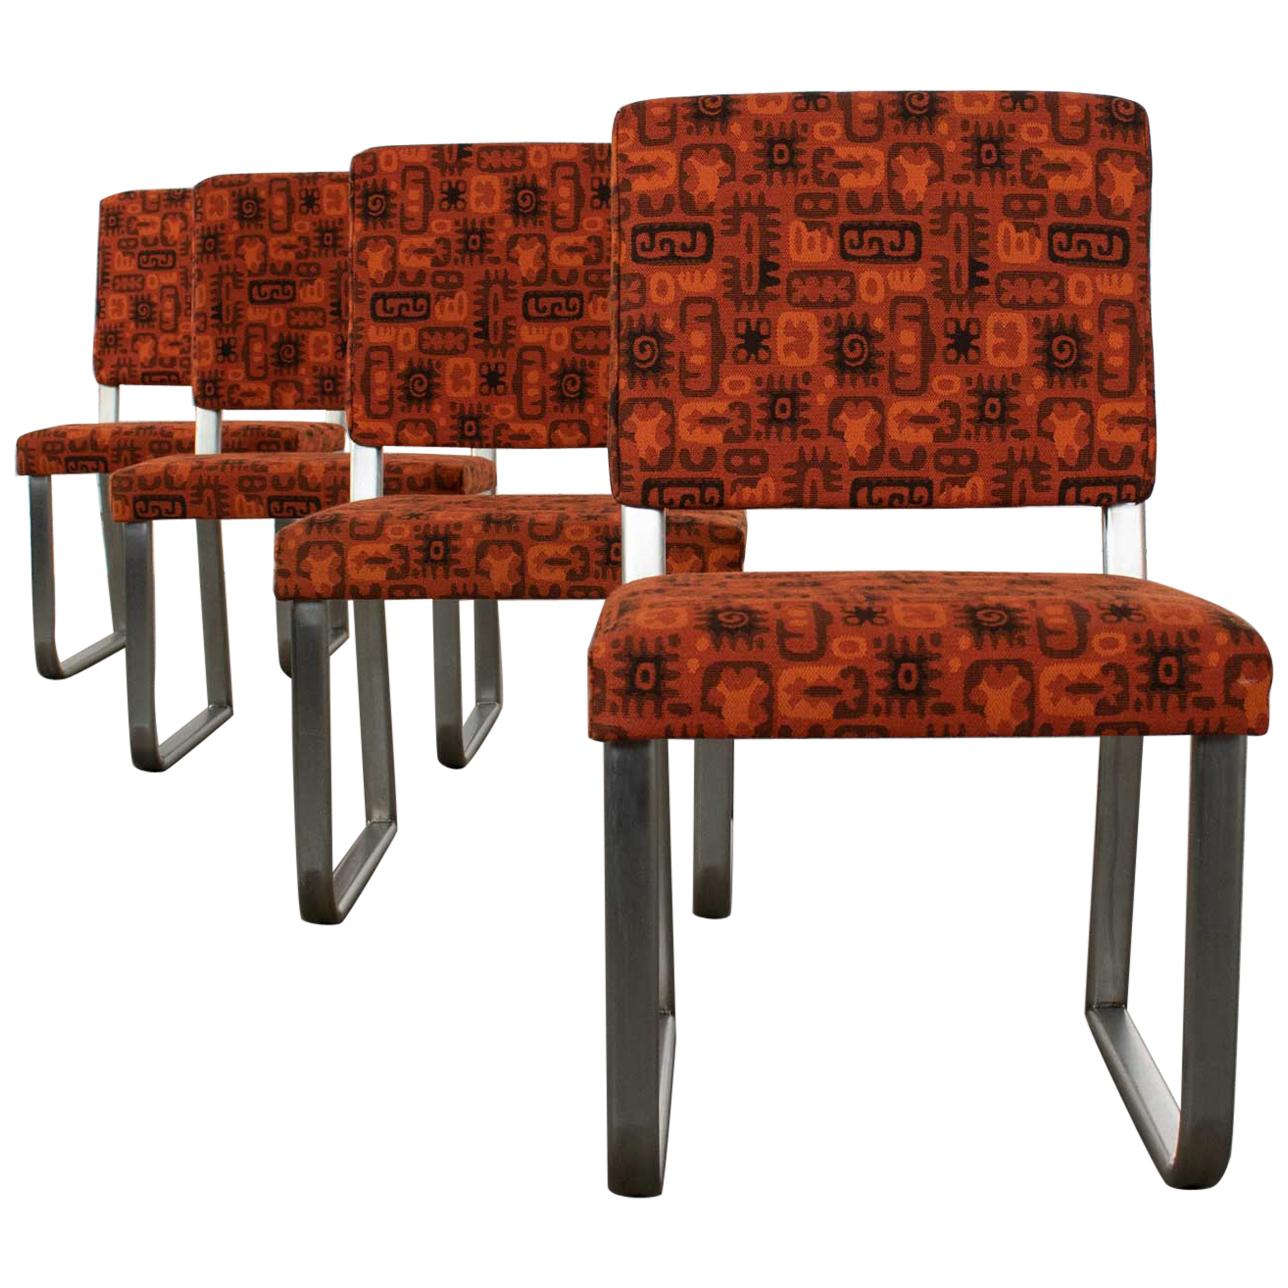 4 Streamline Modern Railroad Dining Car Chairs Stainless Steel and Orange Fabric